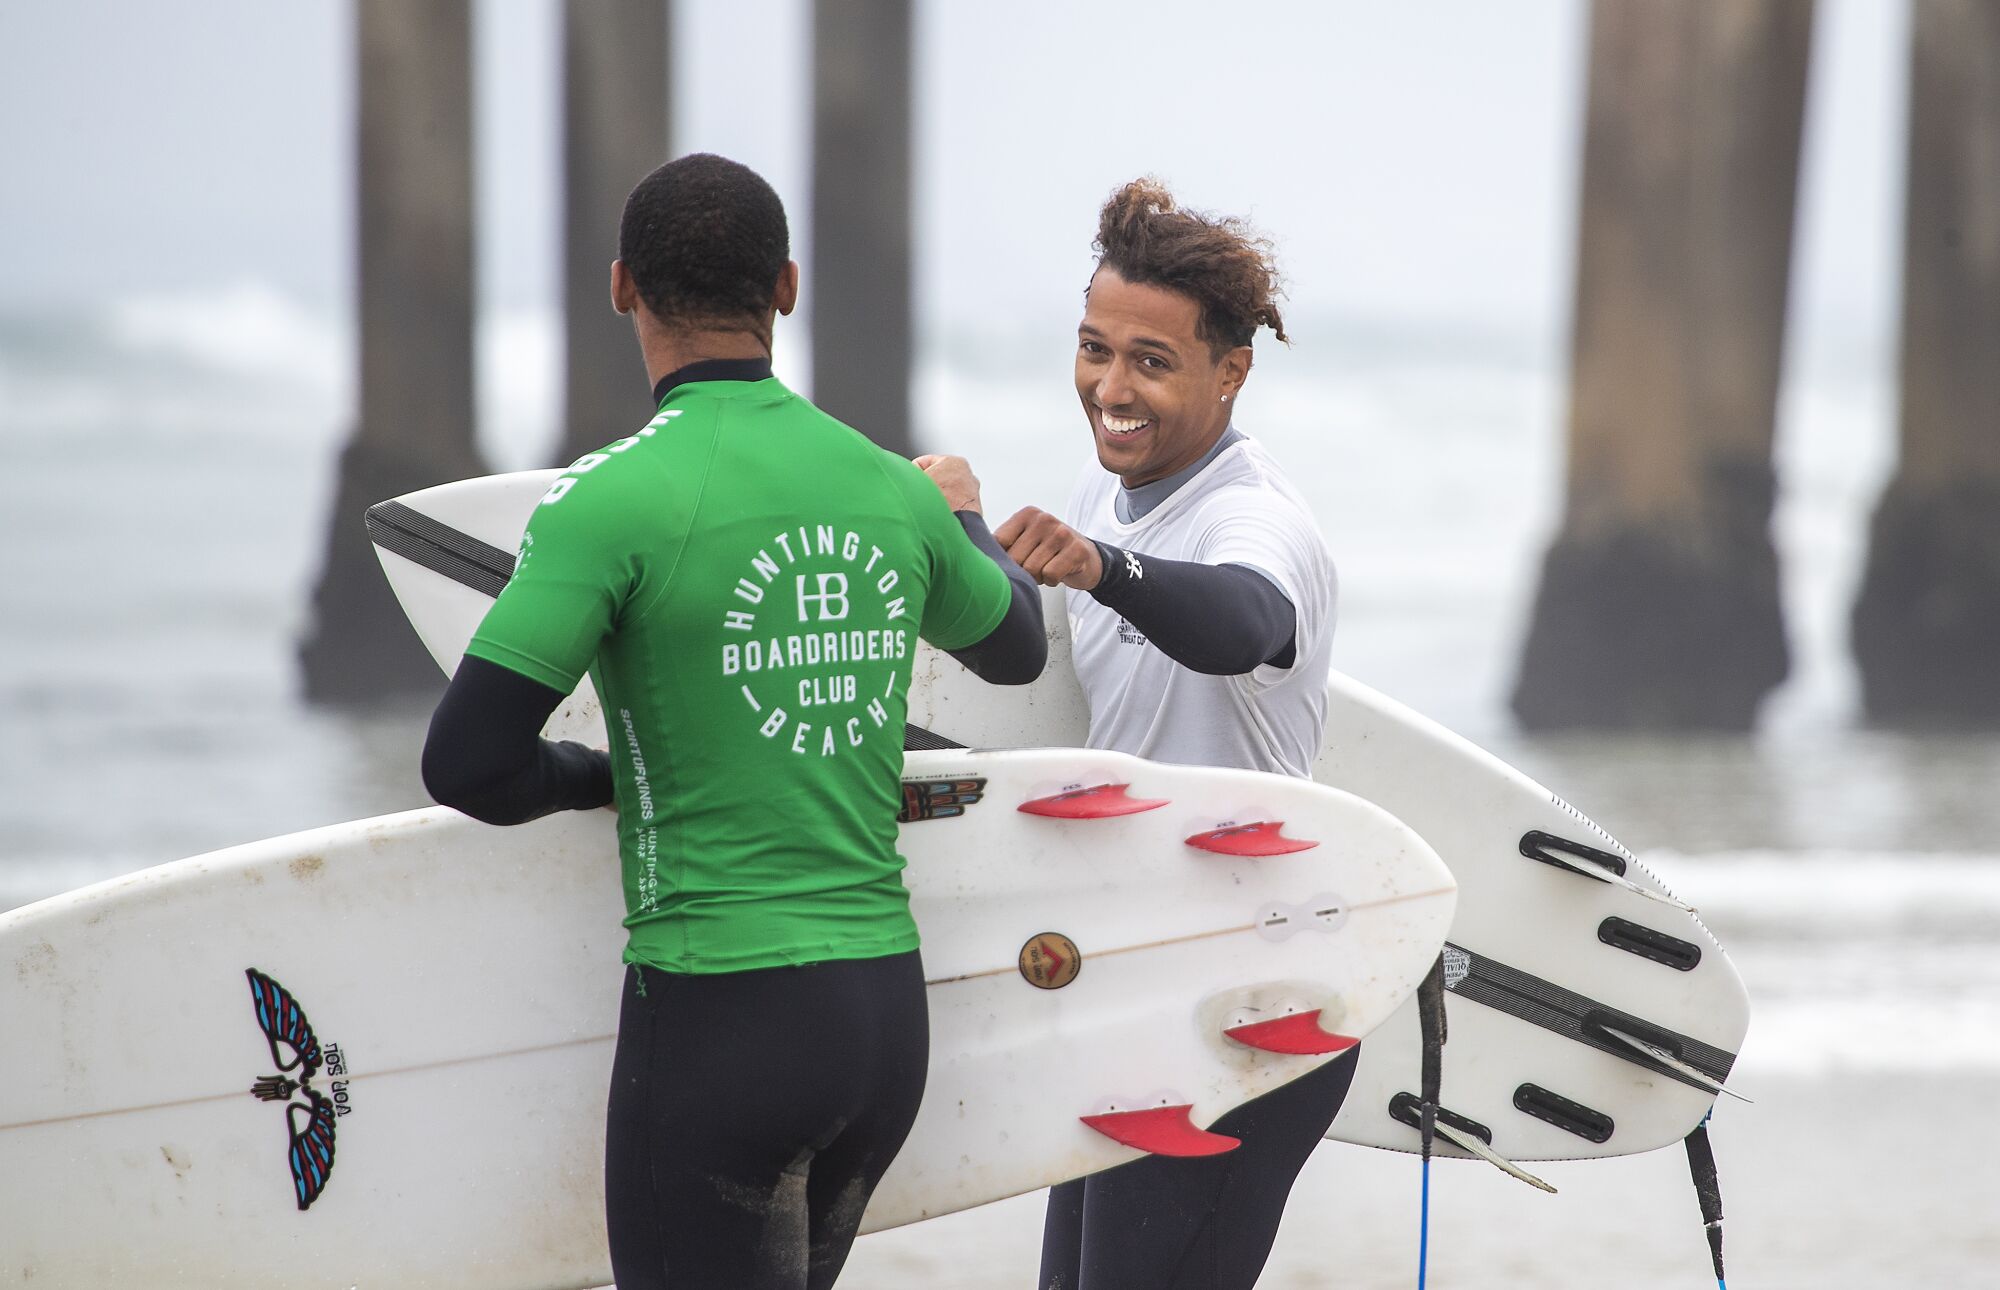 Kayiita Johnson, right, bumps fists with a fellow surfer as they head out to compete.